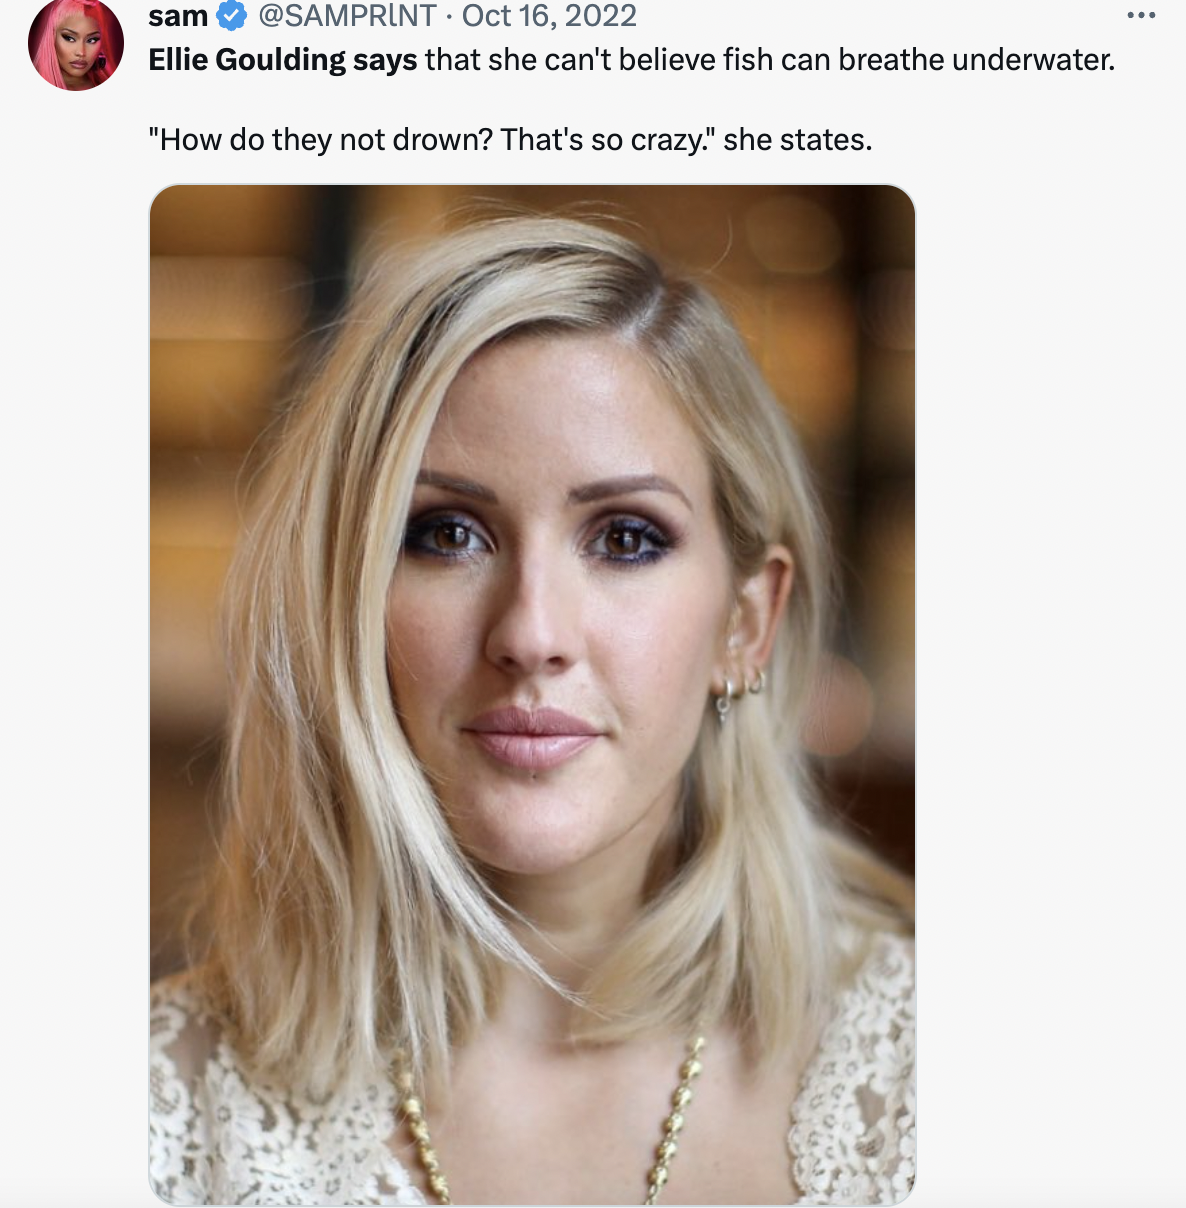 Ellie Goulding says - ellie goulding - sam Ellie Goulding says that she can't believe fish can breathe underwater.